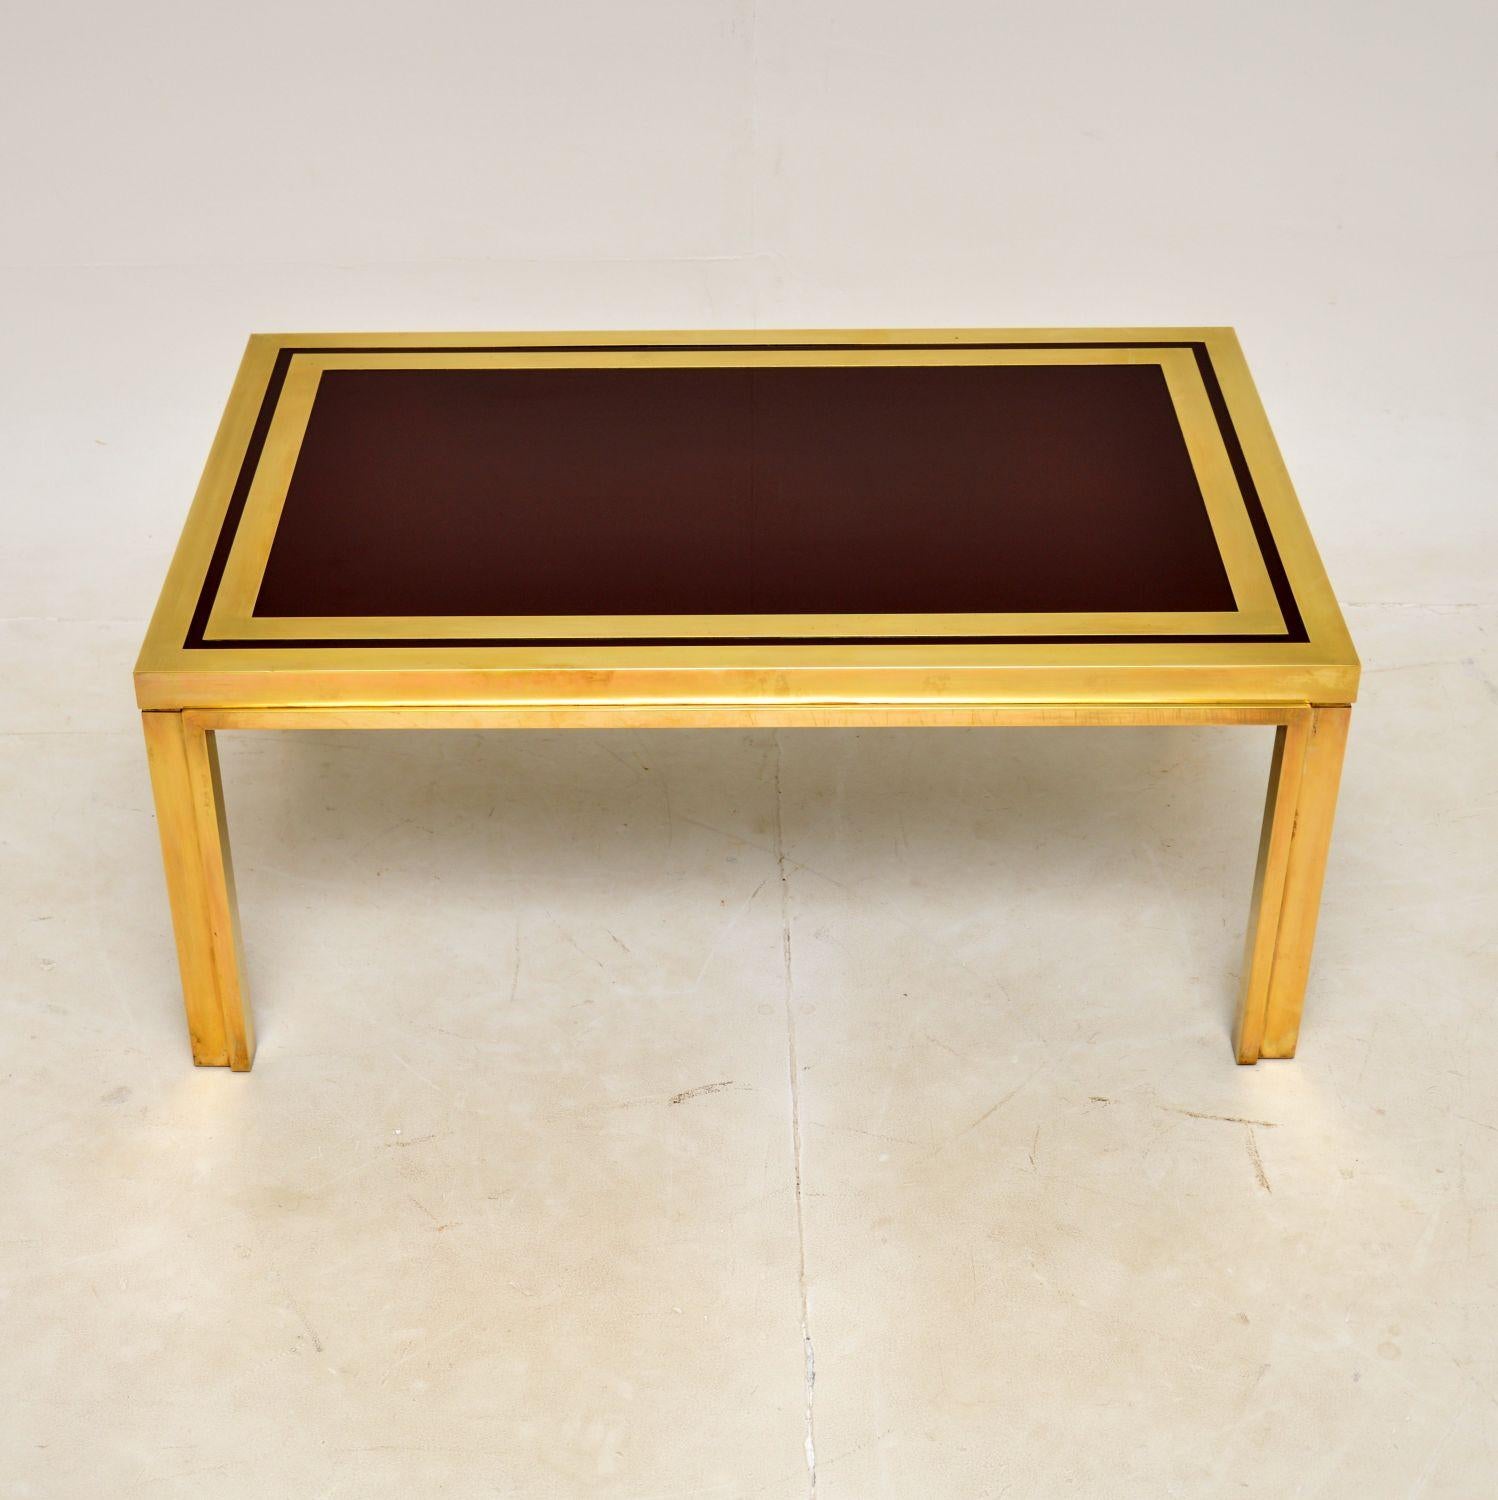 A stunning vintage Italian coffee table in brass with a burgundy coloured lacquered top. This dates from the 1970s.

The quality is outstanding and this has an absolutely gorgeous design, it looks amazing from all angles.

We have given the brass